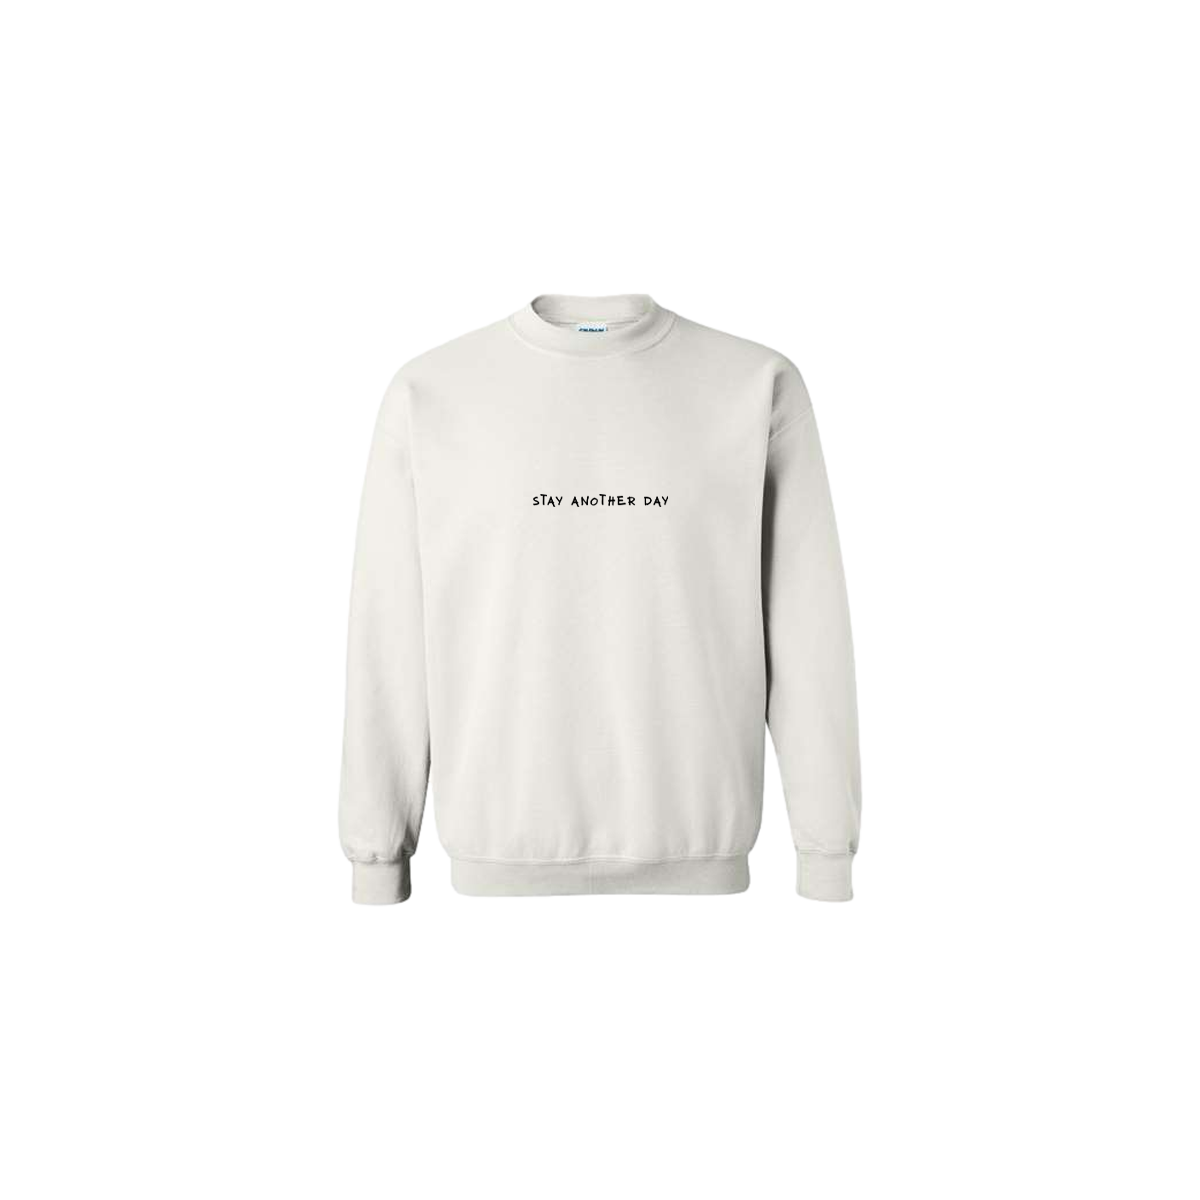 Stay Another Day Text Embroidered White Crewneck - Mental Health Awareness Clothing